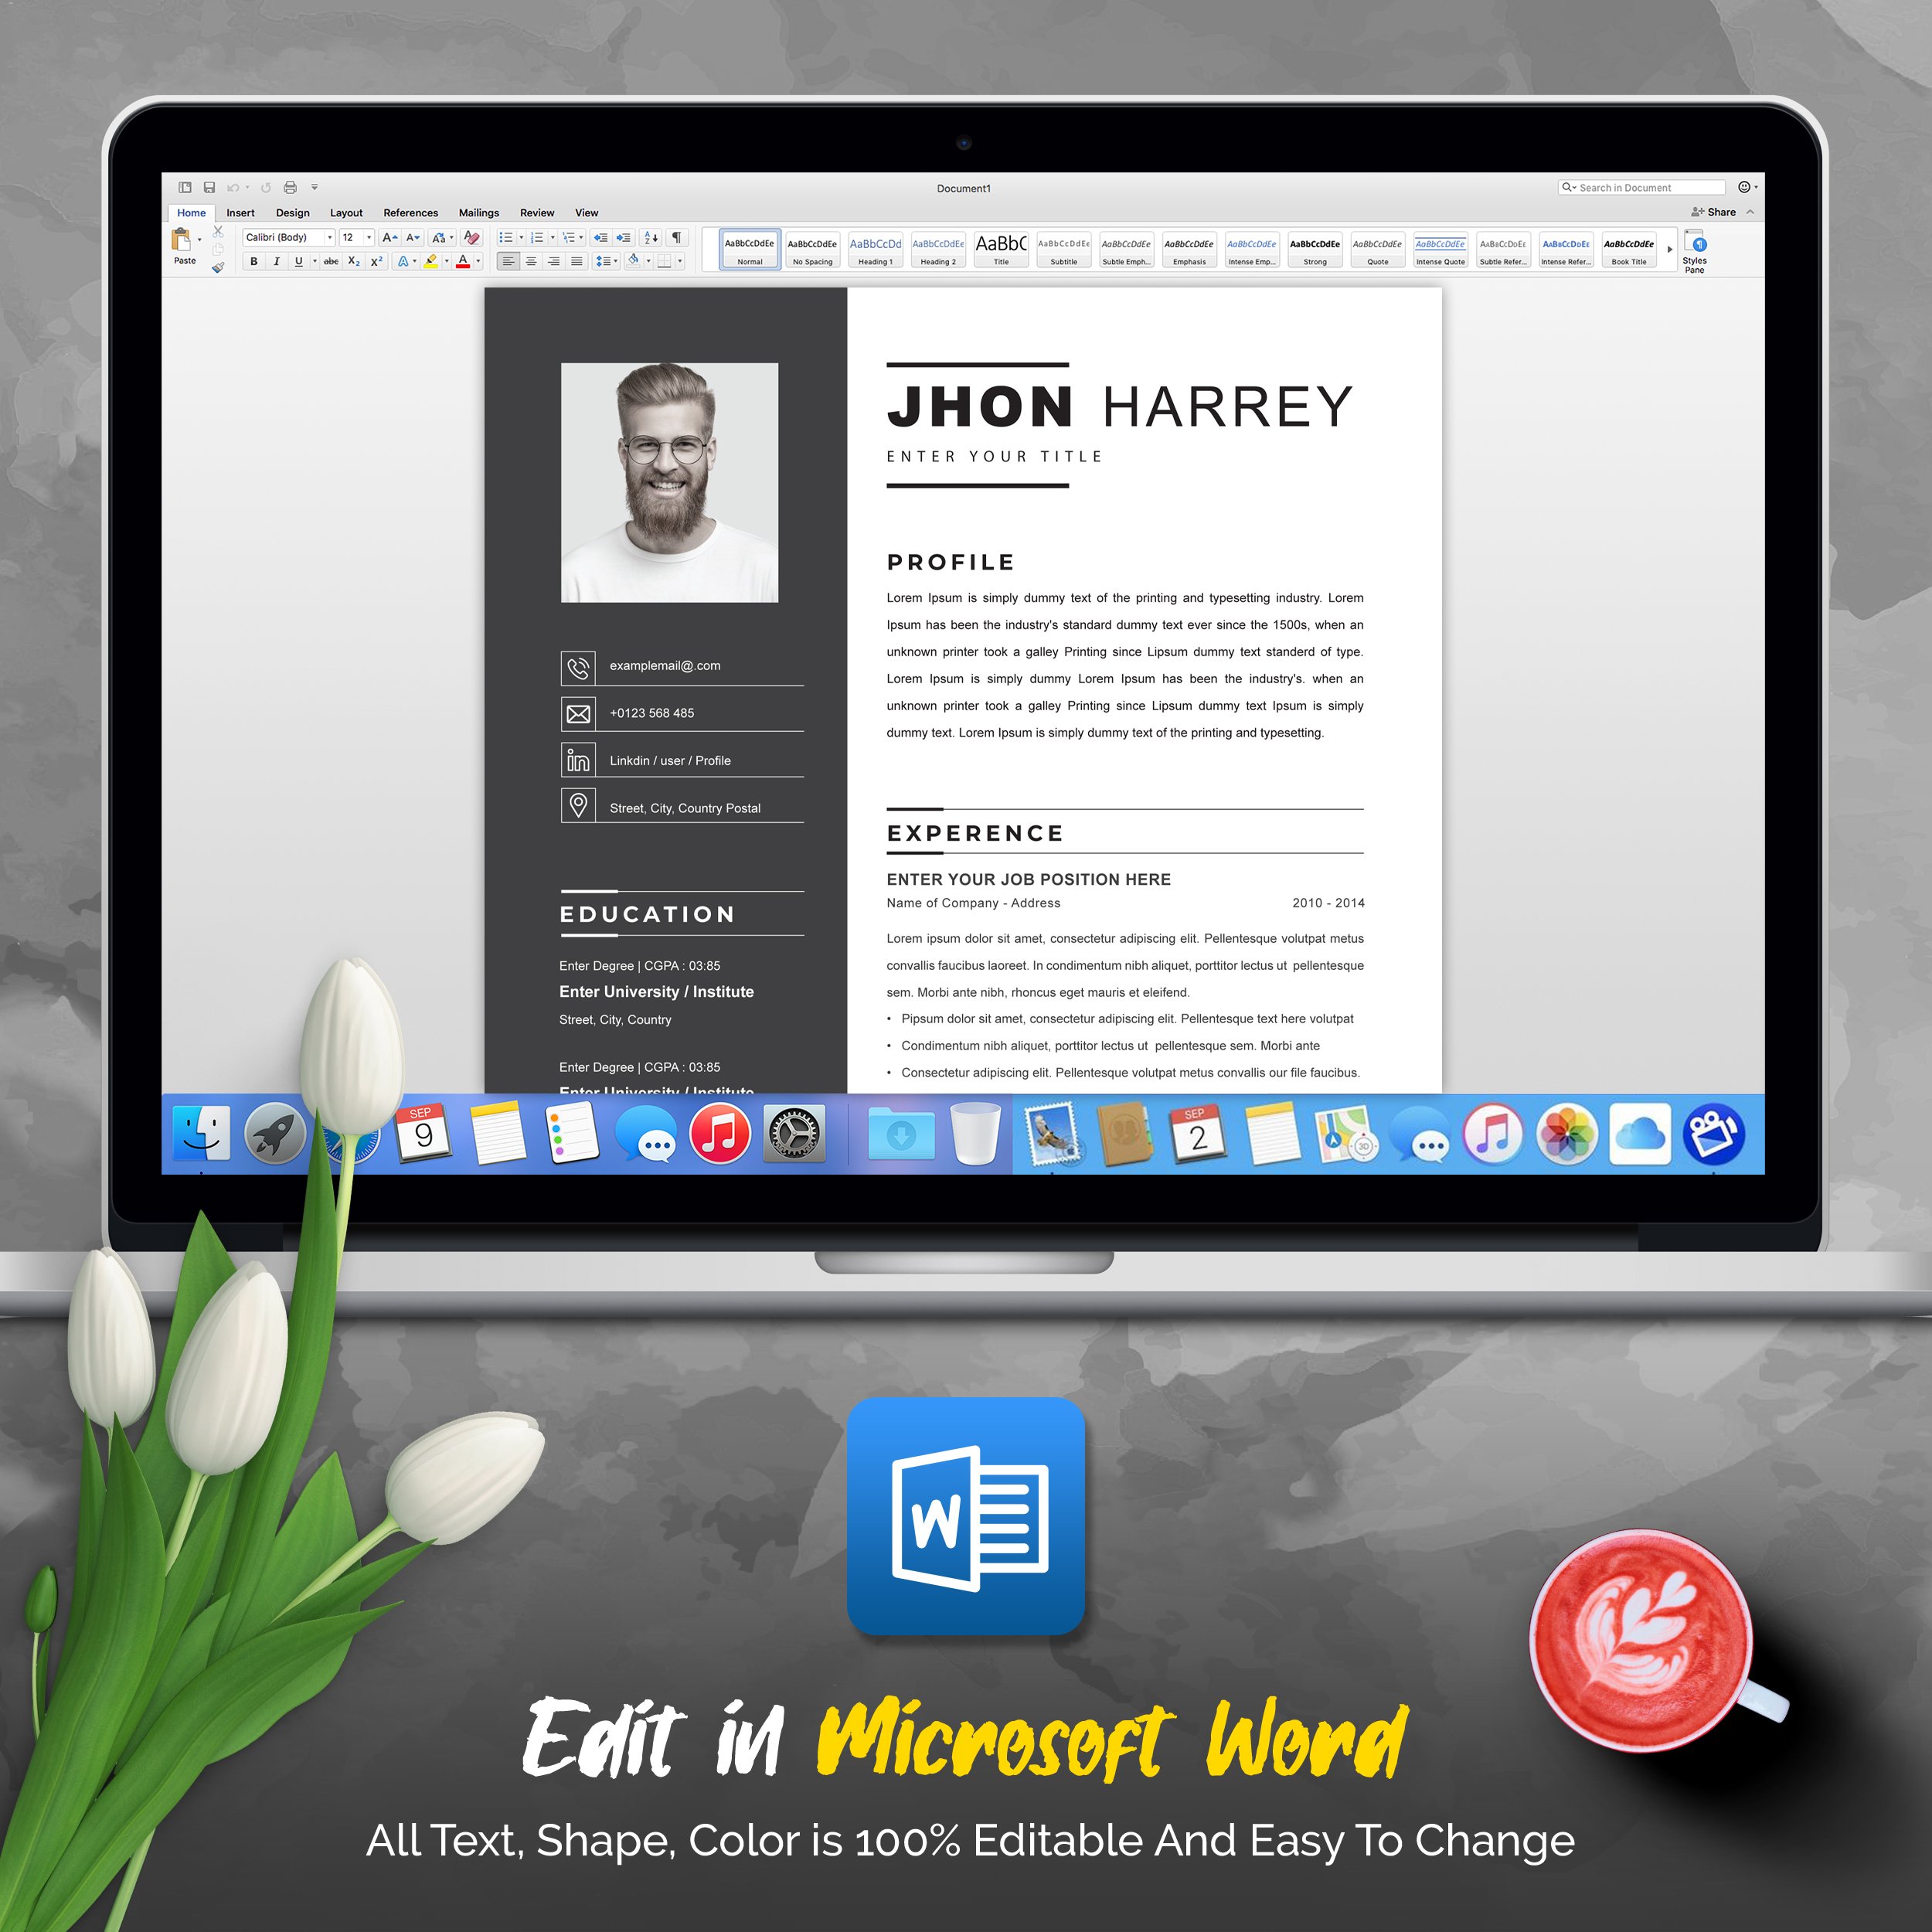 05 3 pages professional ms word aple pages eps photoshop psd resume cv design template design by resume inventor 141